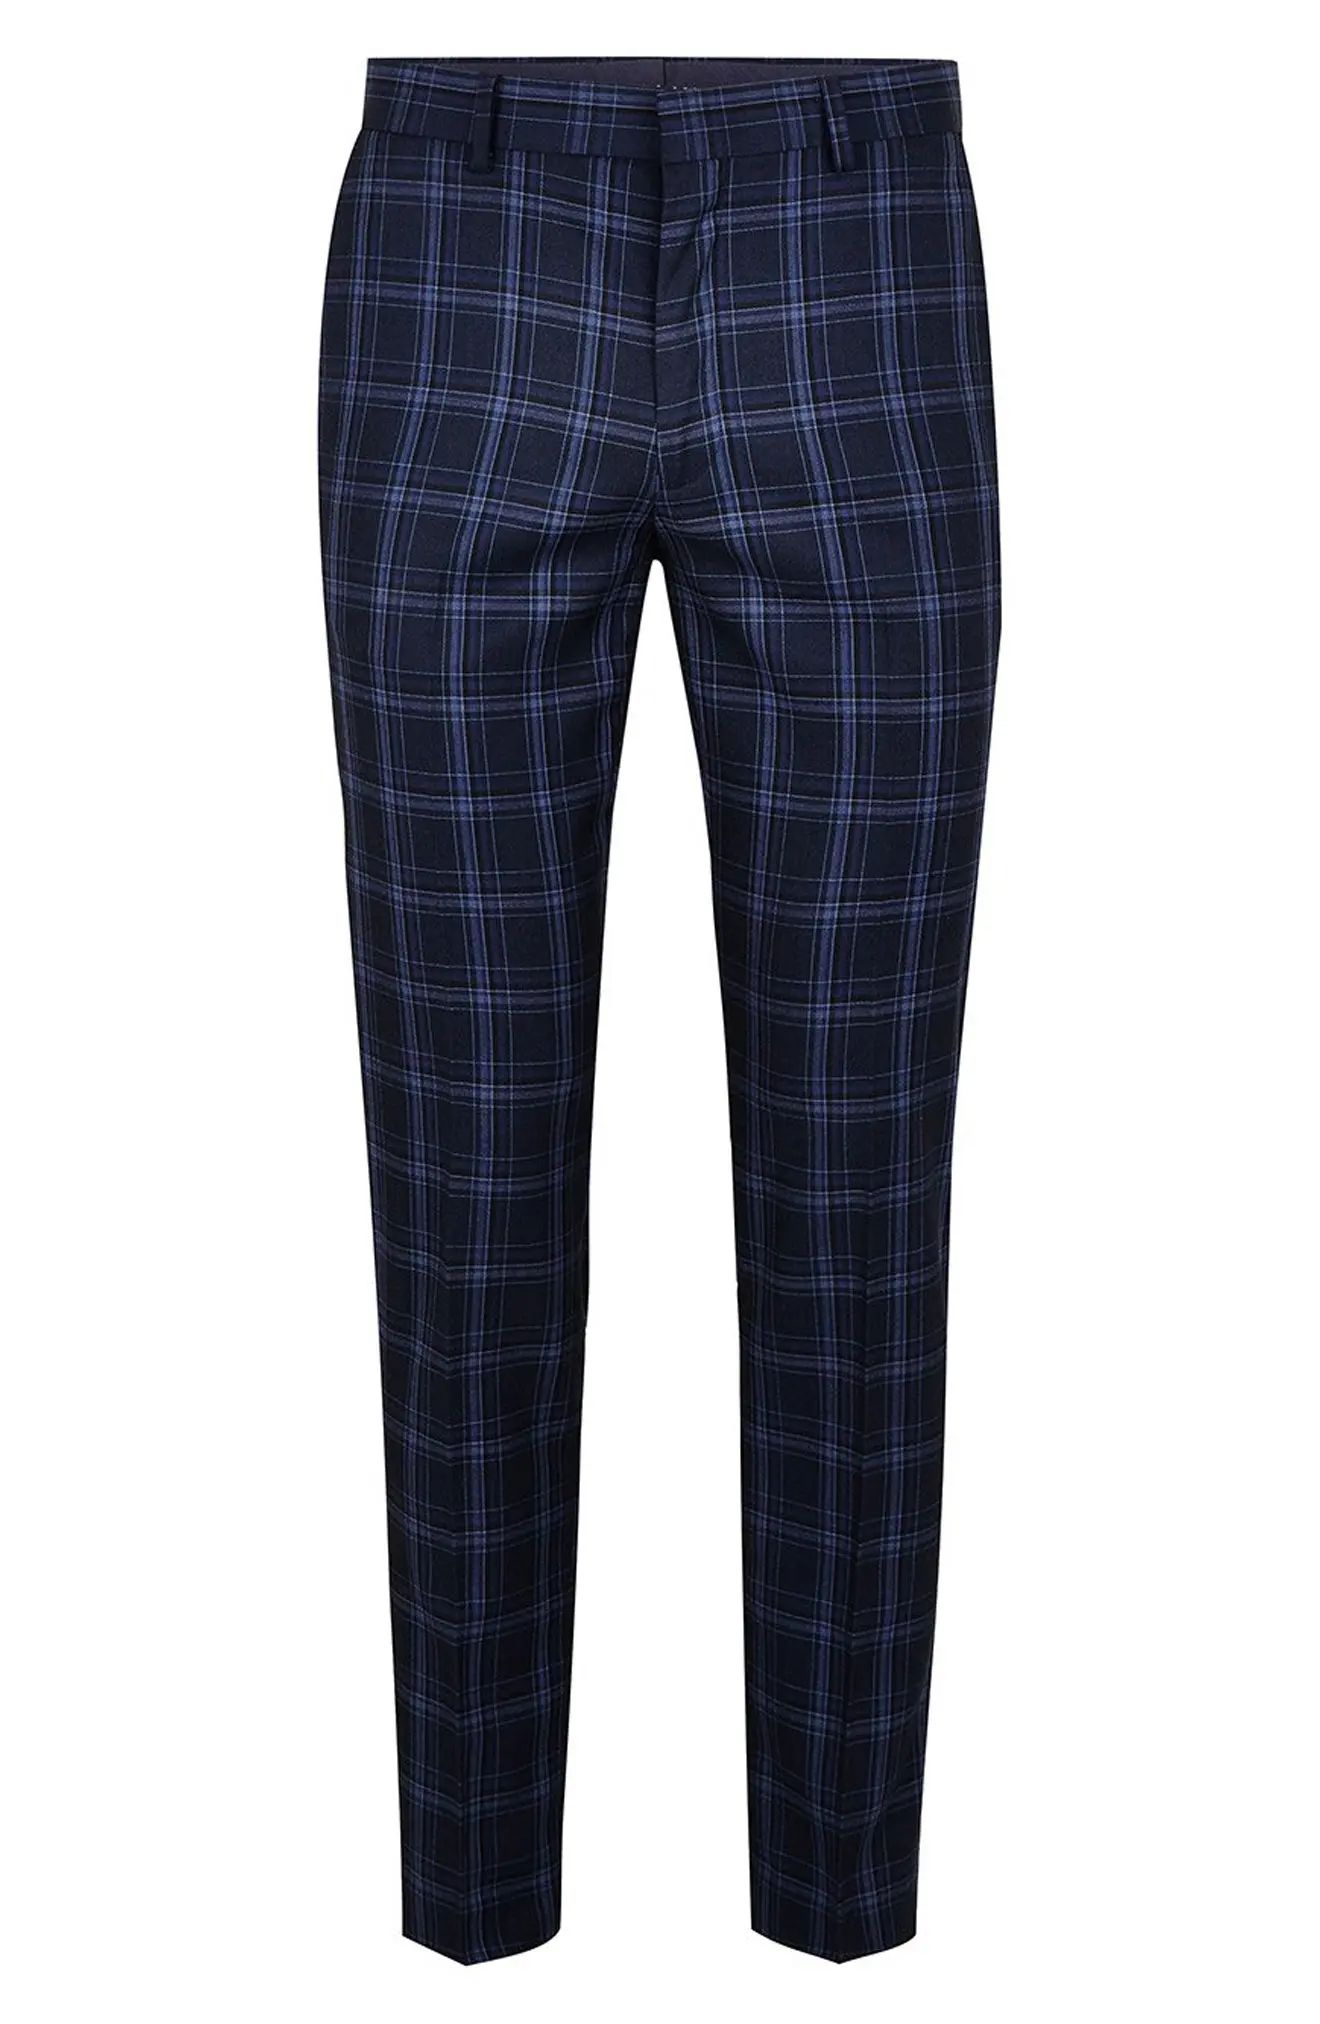 Topman Skinny Fit Check Trousers | Nordstrom